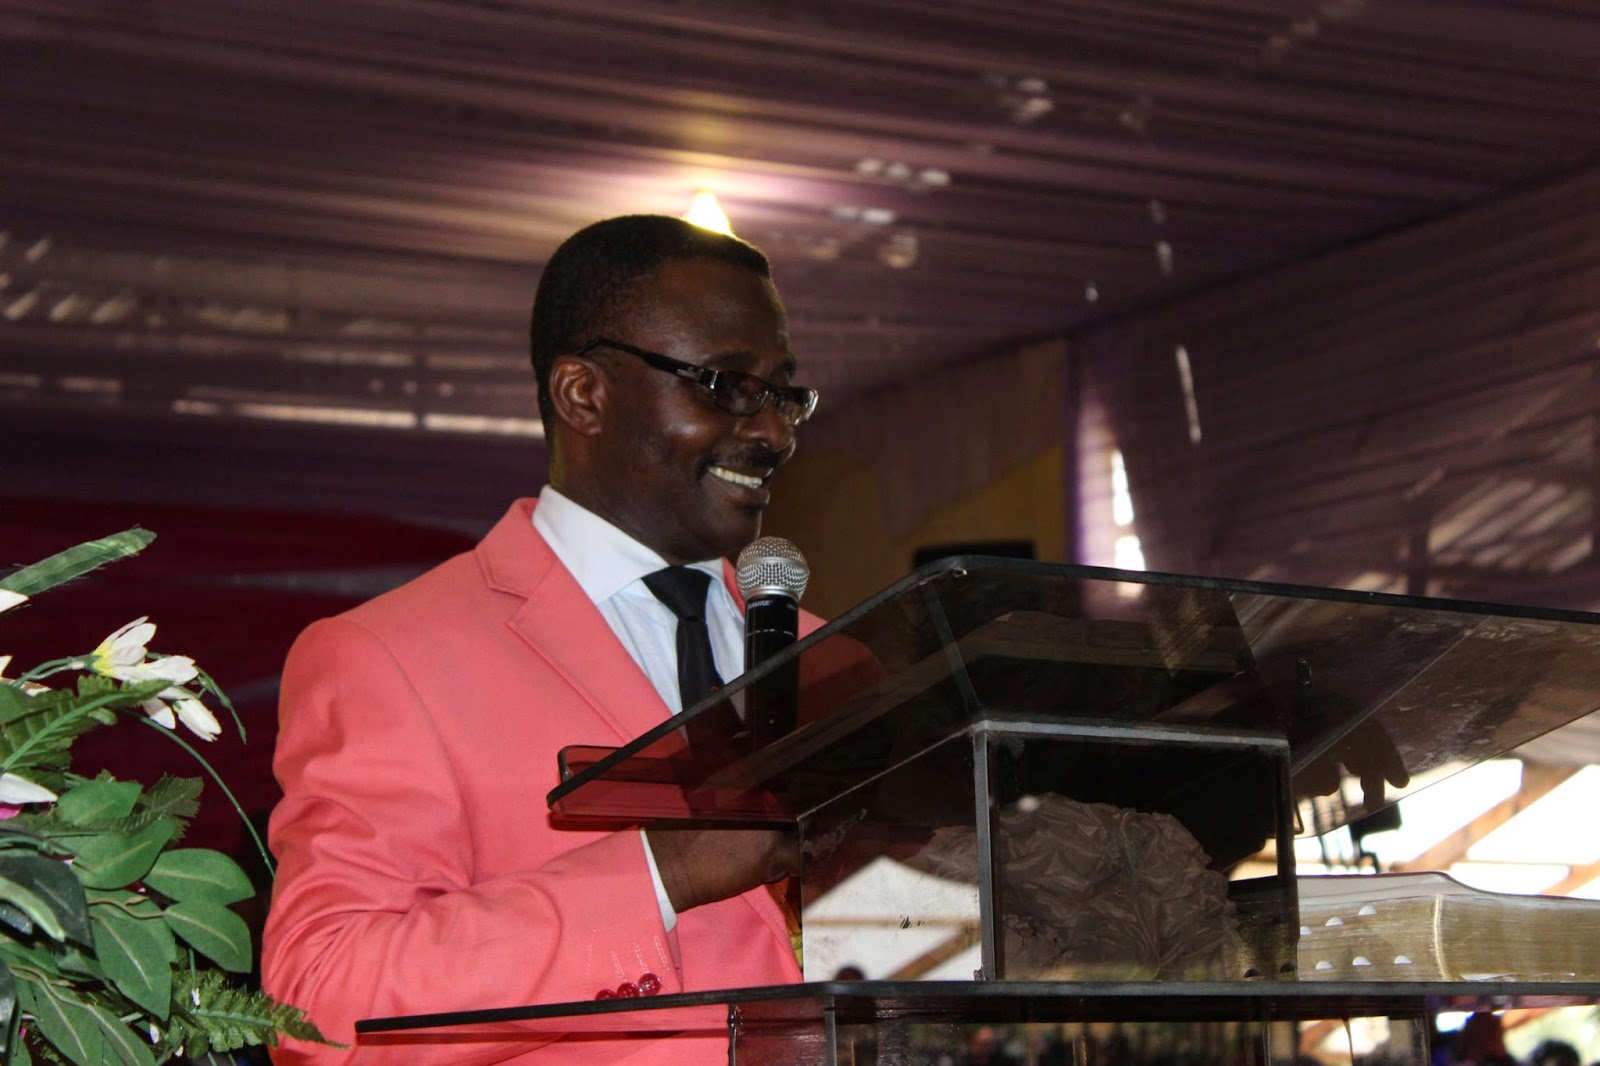 Dr. Supo Ayokunle, the president of the Christian Association of Nigeria, CAN